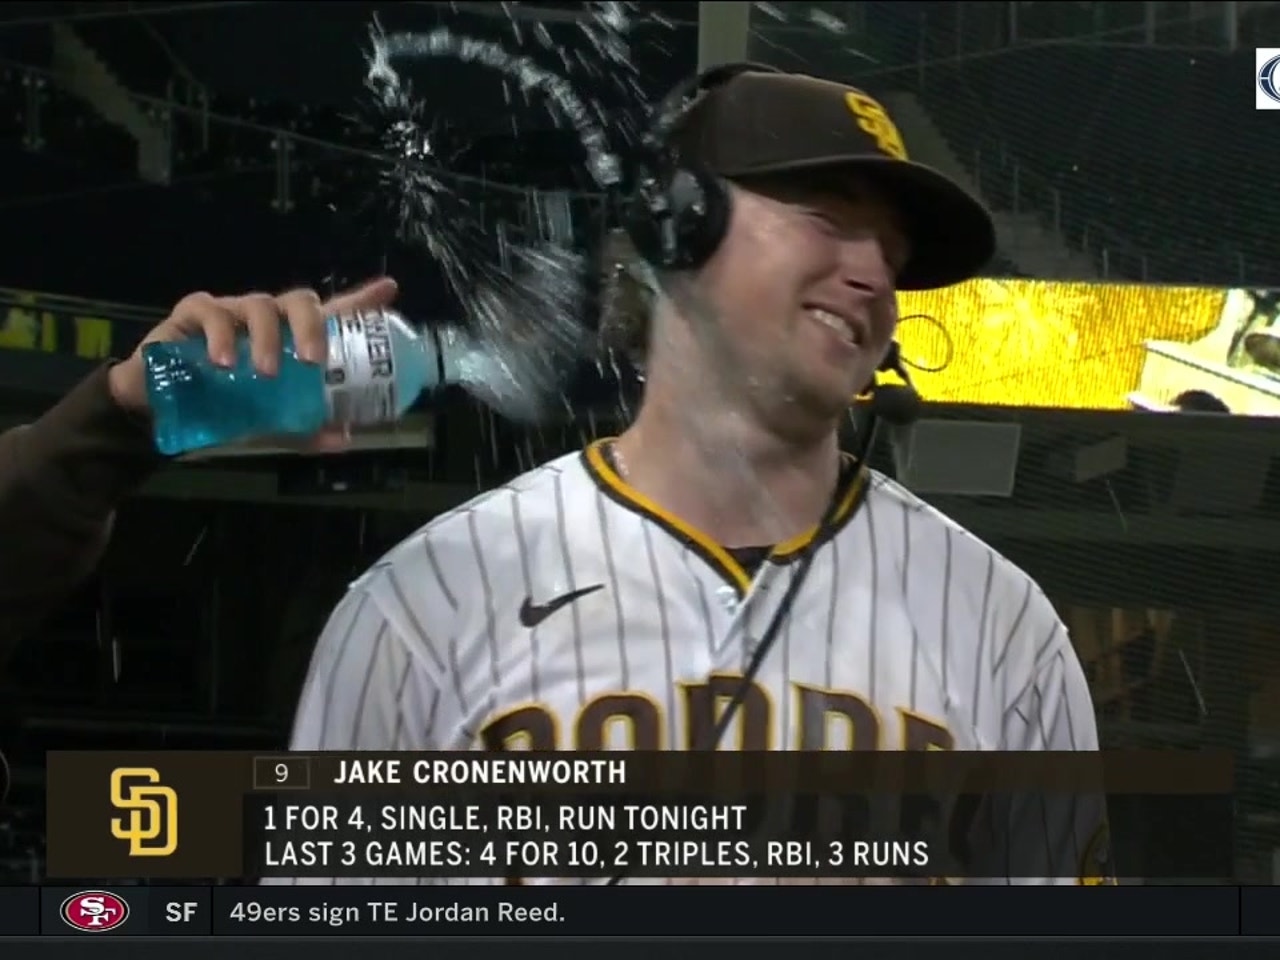 Jake Cronenworth had a huge game for the Padres in win over